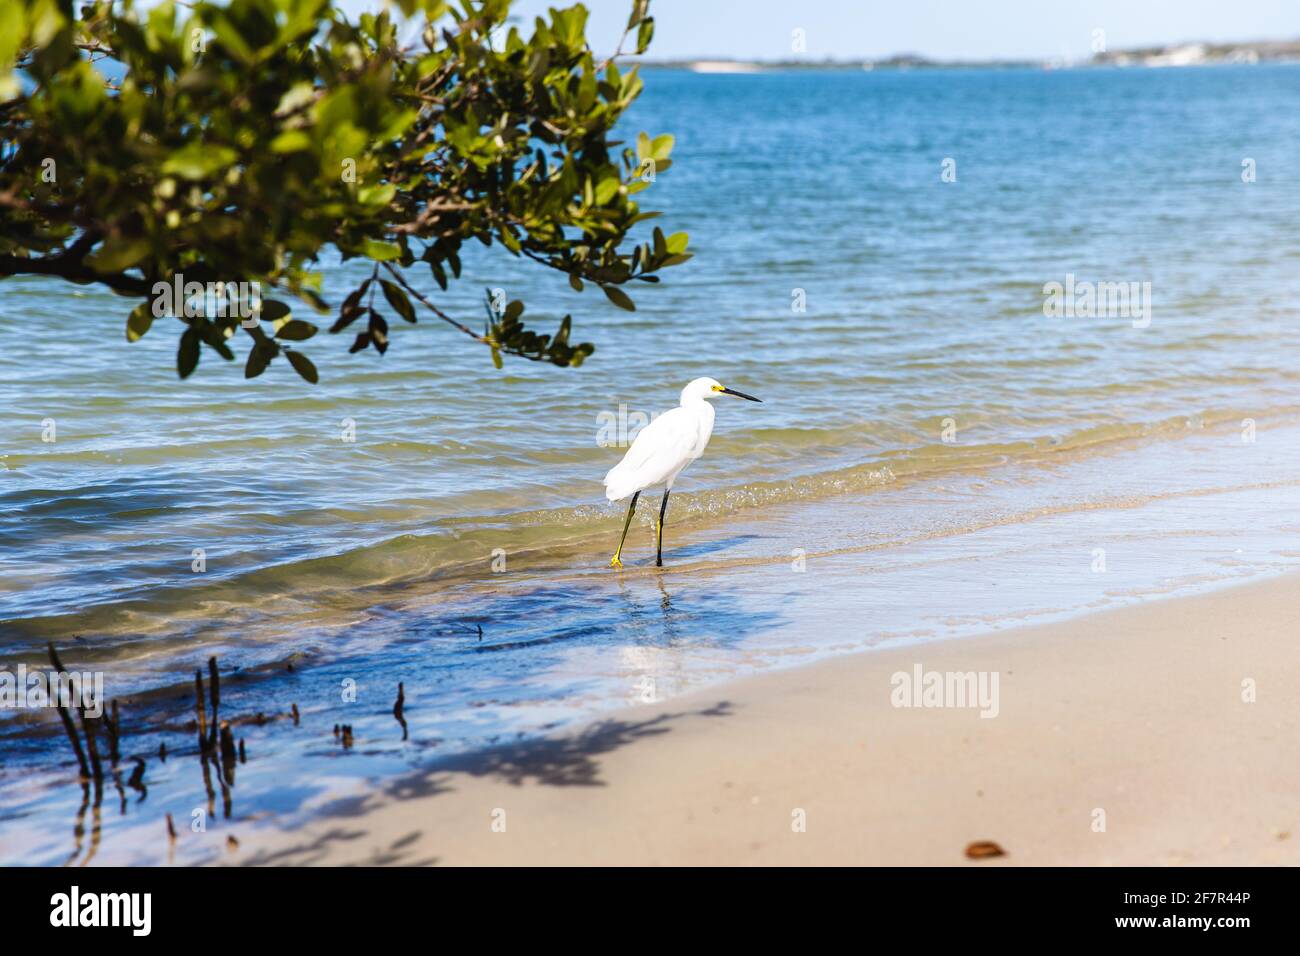 tall white bird with both legs in the water on a sandy beach Stock Photo